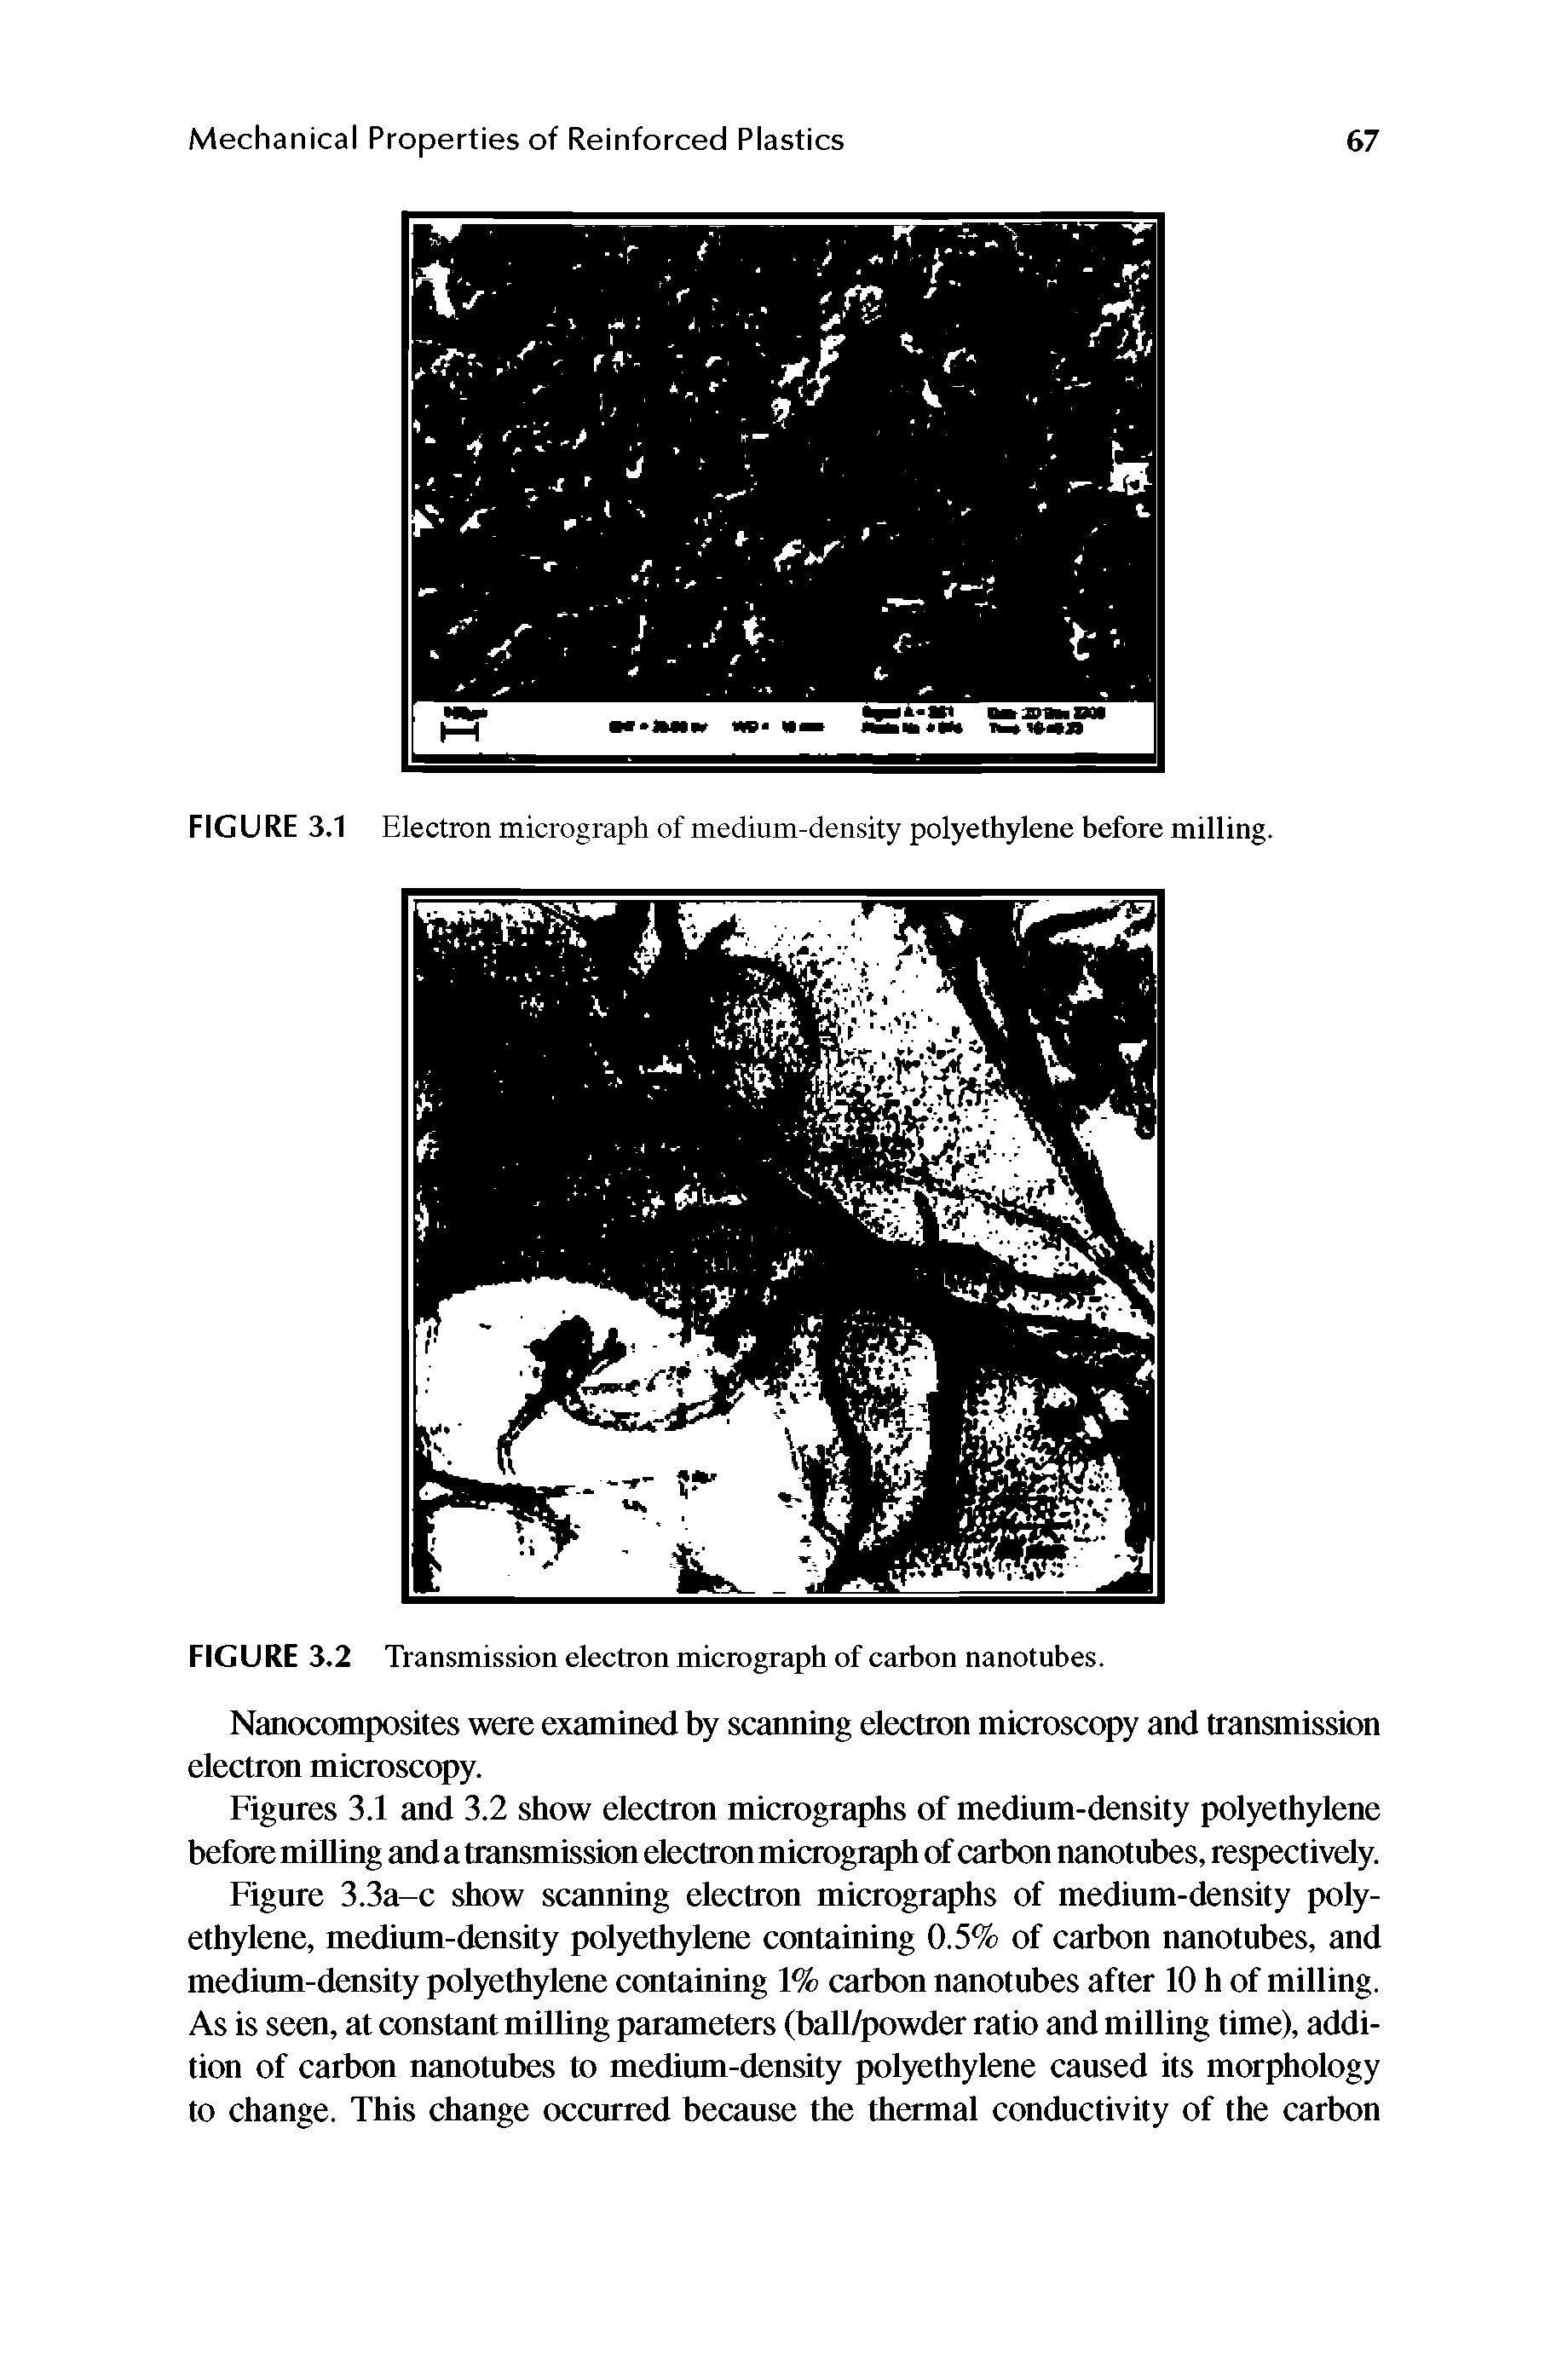 Figures 3.1 and 3.2 show electron micrographs of medium-density polyethylene before milling and a transmission electron micrograph of carbon nanotubes, respectively.